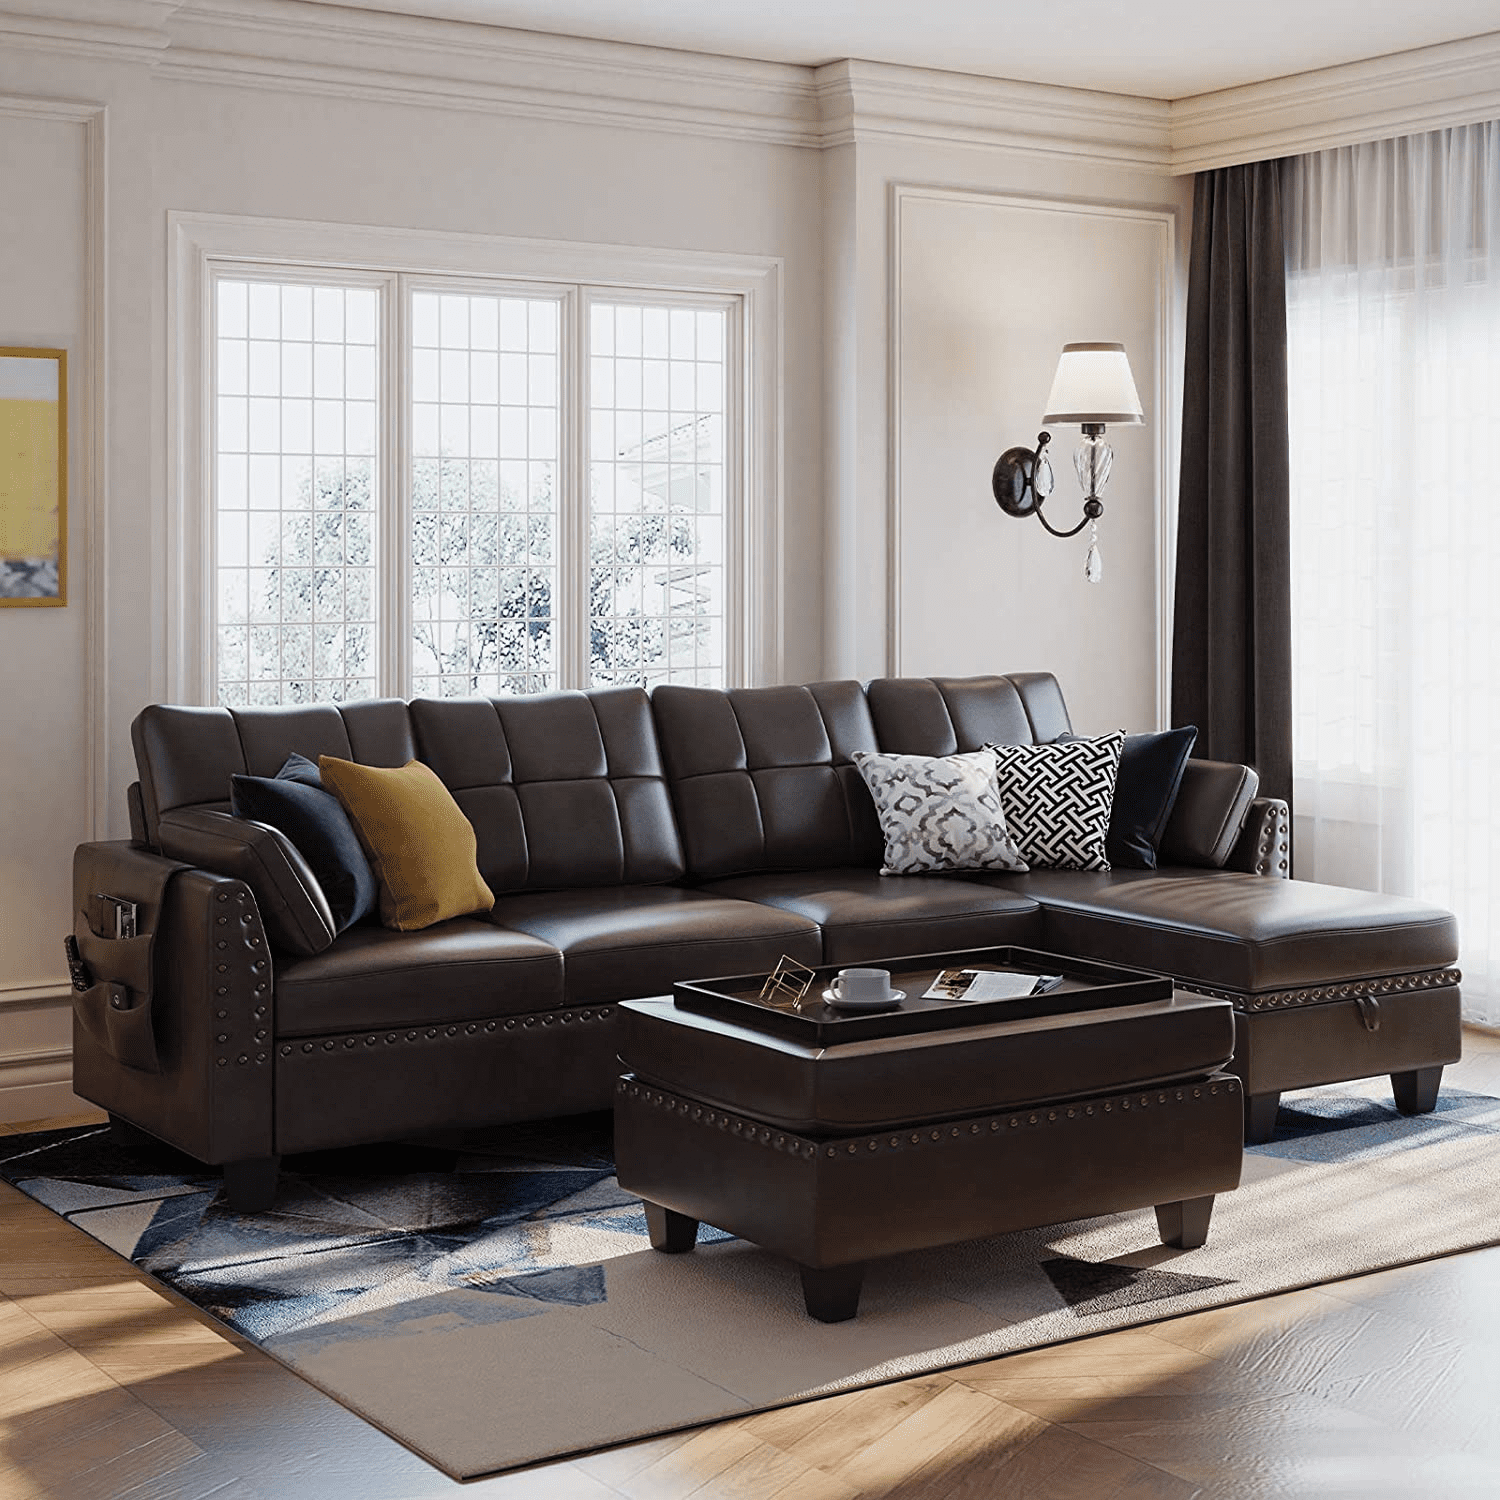 Honbay Faux Leather Sectional Sofa Set L Shaped Couch With Chaise & Ottoman  Brown For Living Room – Walmart With Regard To Faux Leather Sectional Sofa Sets (View 2 of 15)